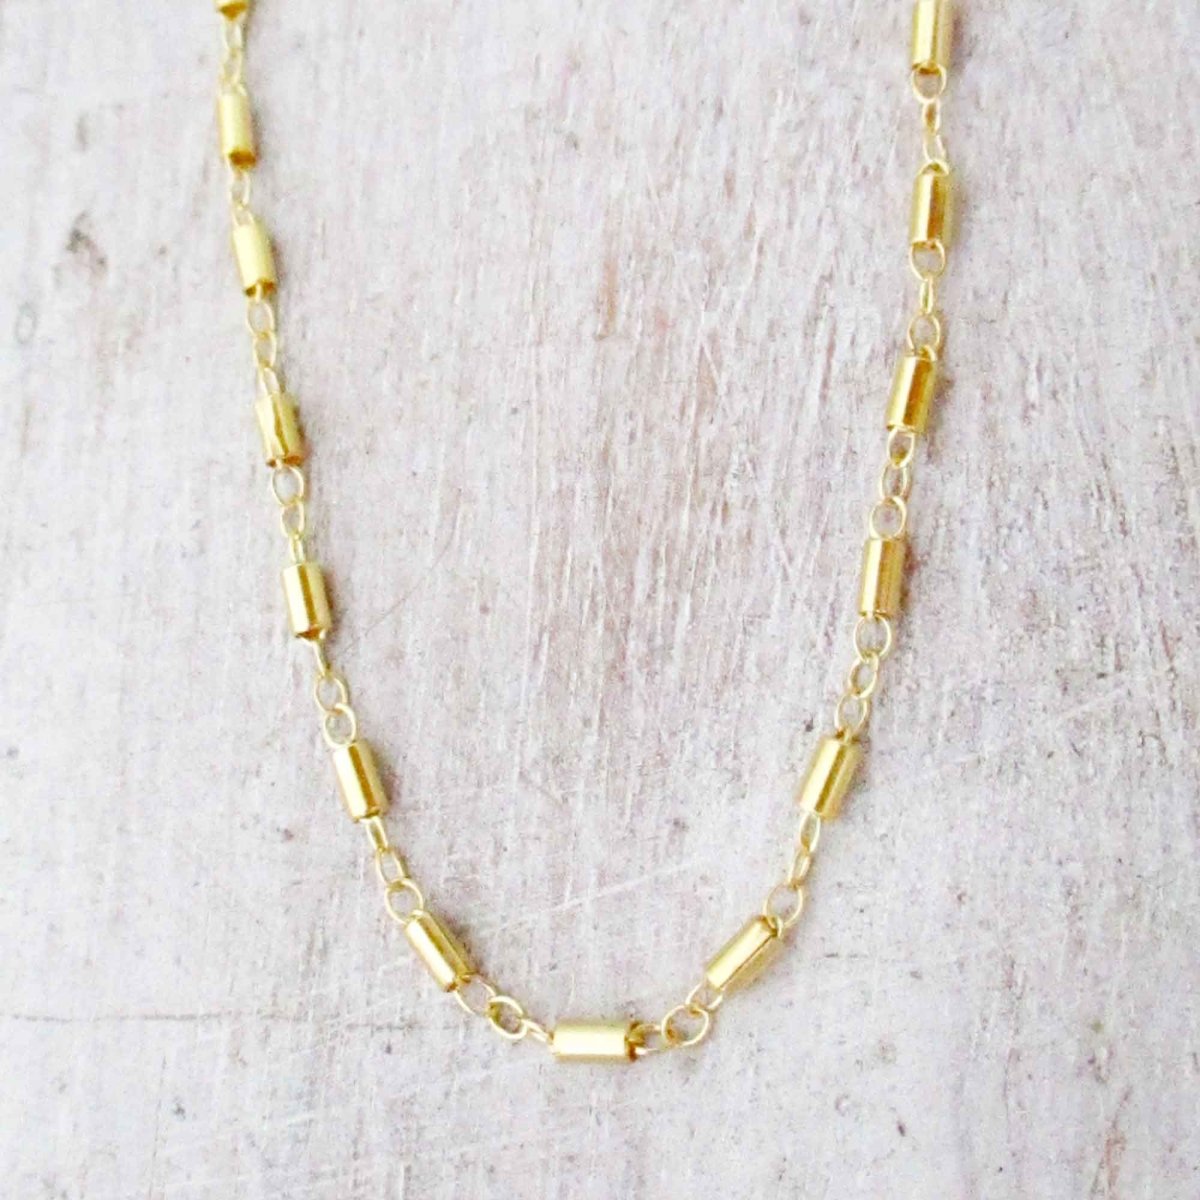 Gold Bar and Link Vintage Style Necklace Chain - Luxe Design Jewellery